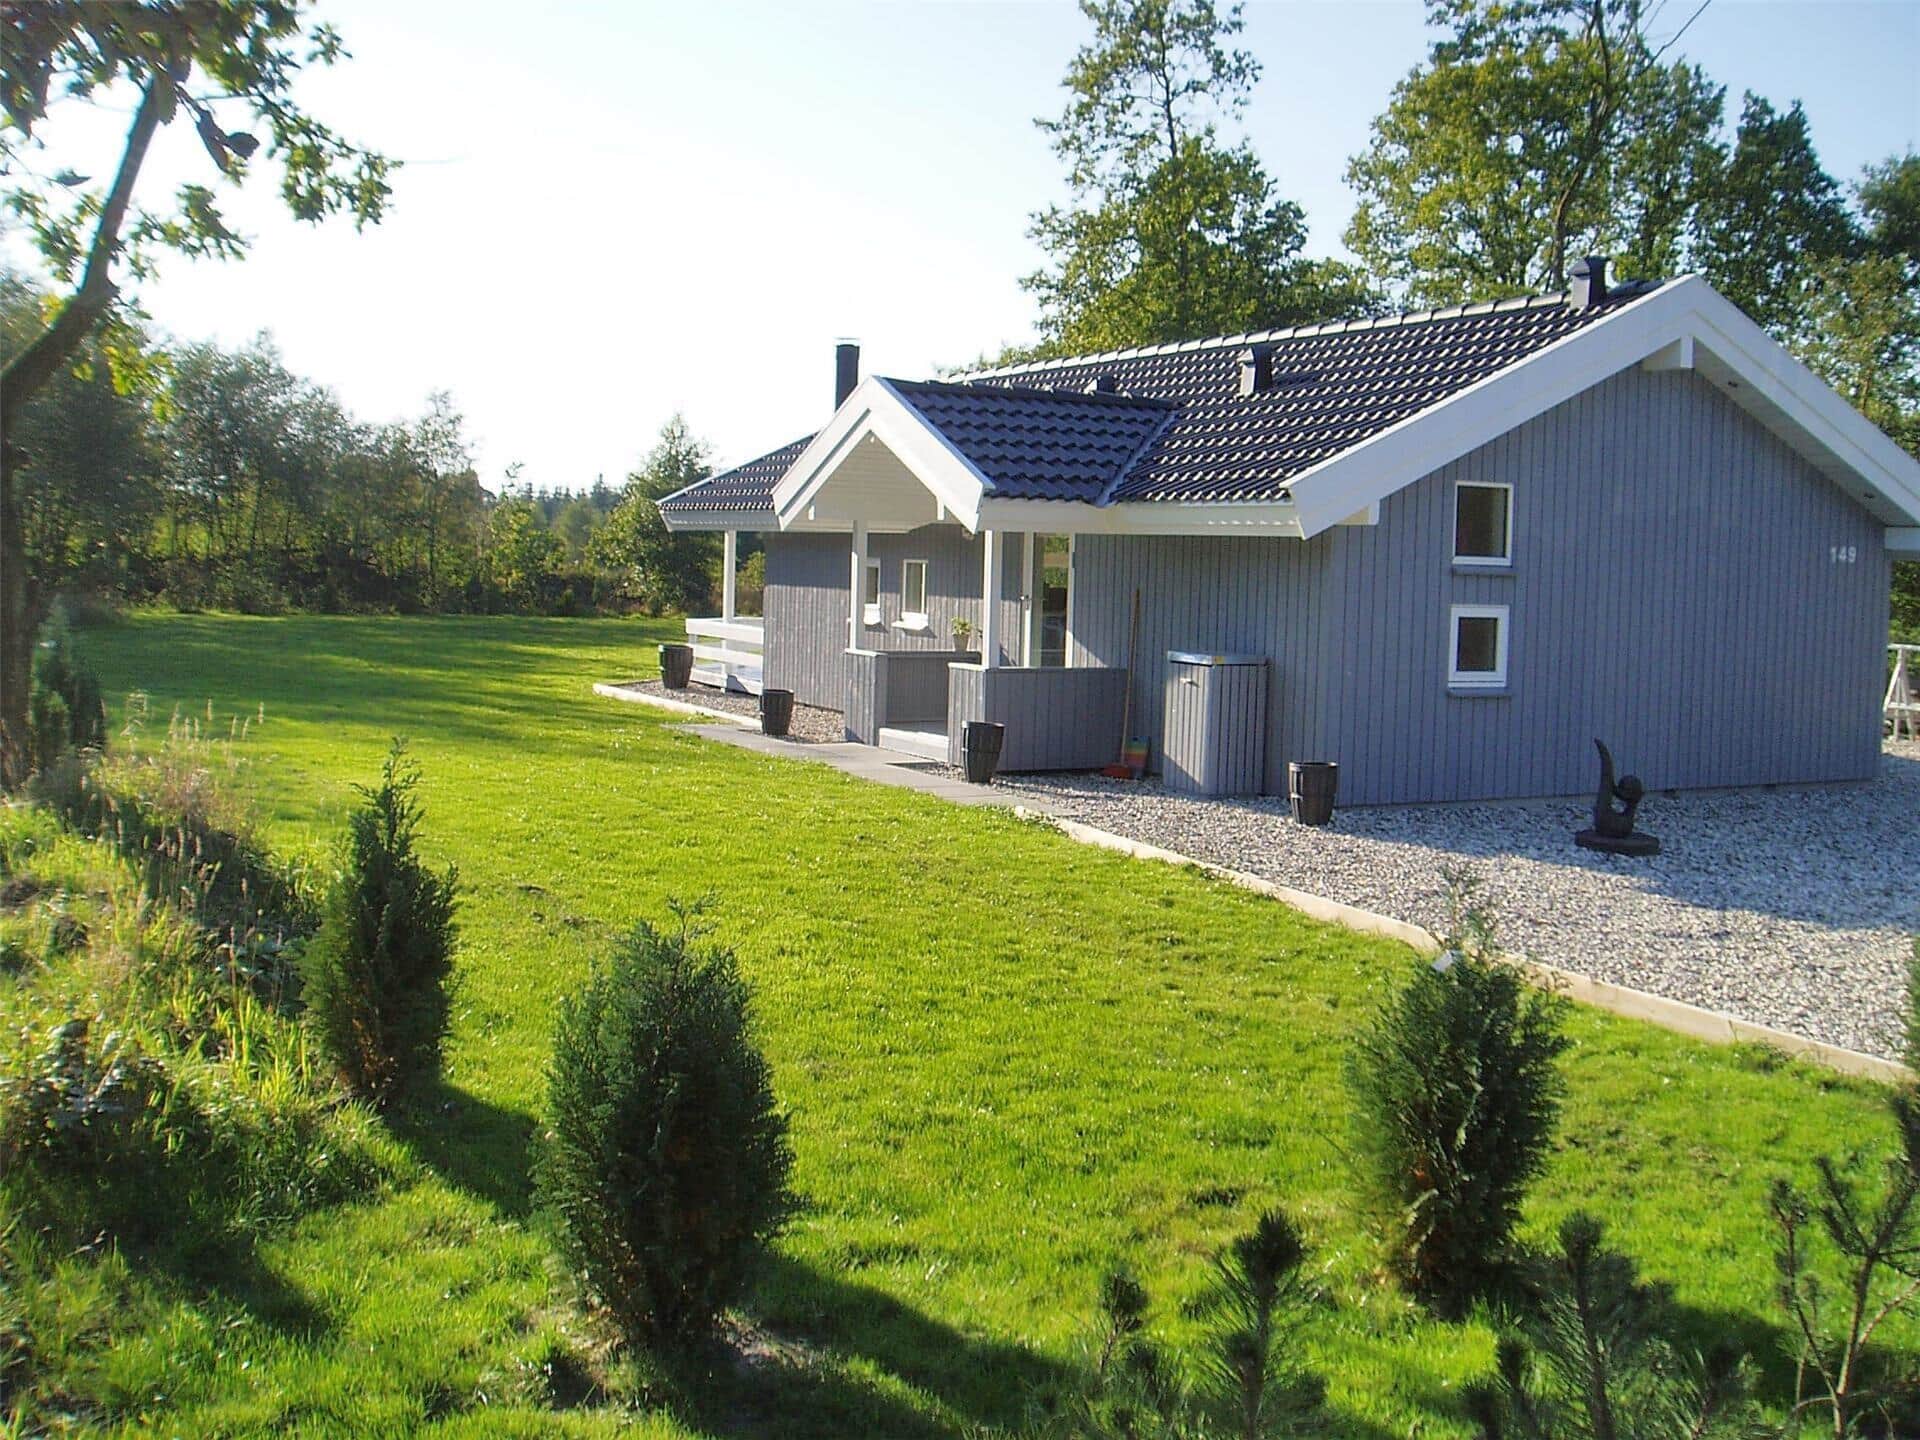 Image 3-3 Holiday-home F50106, Skovbrynet 149, DK - 7323 Give